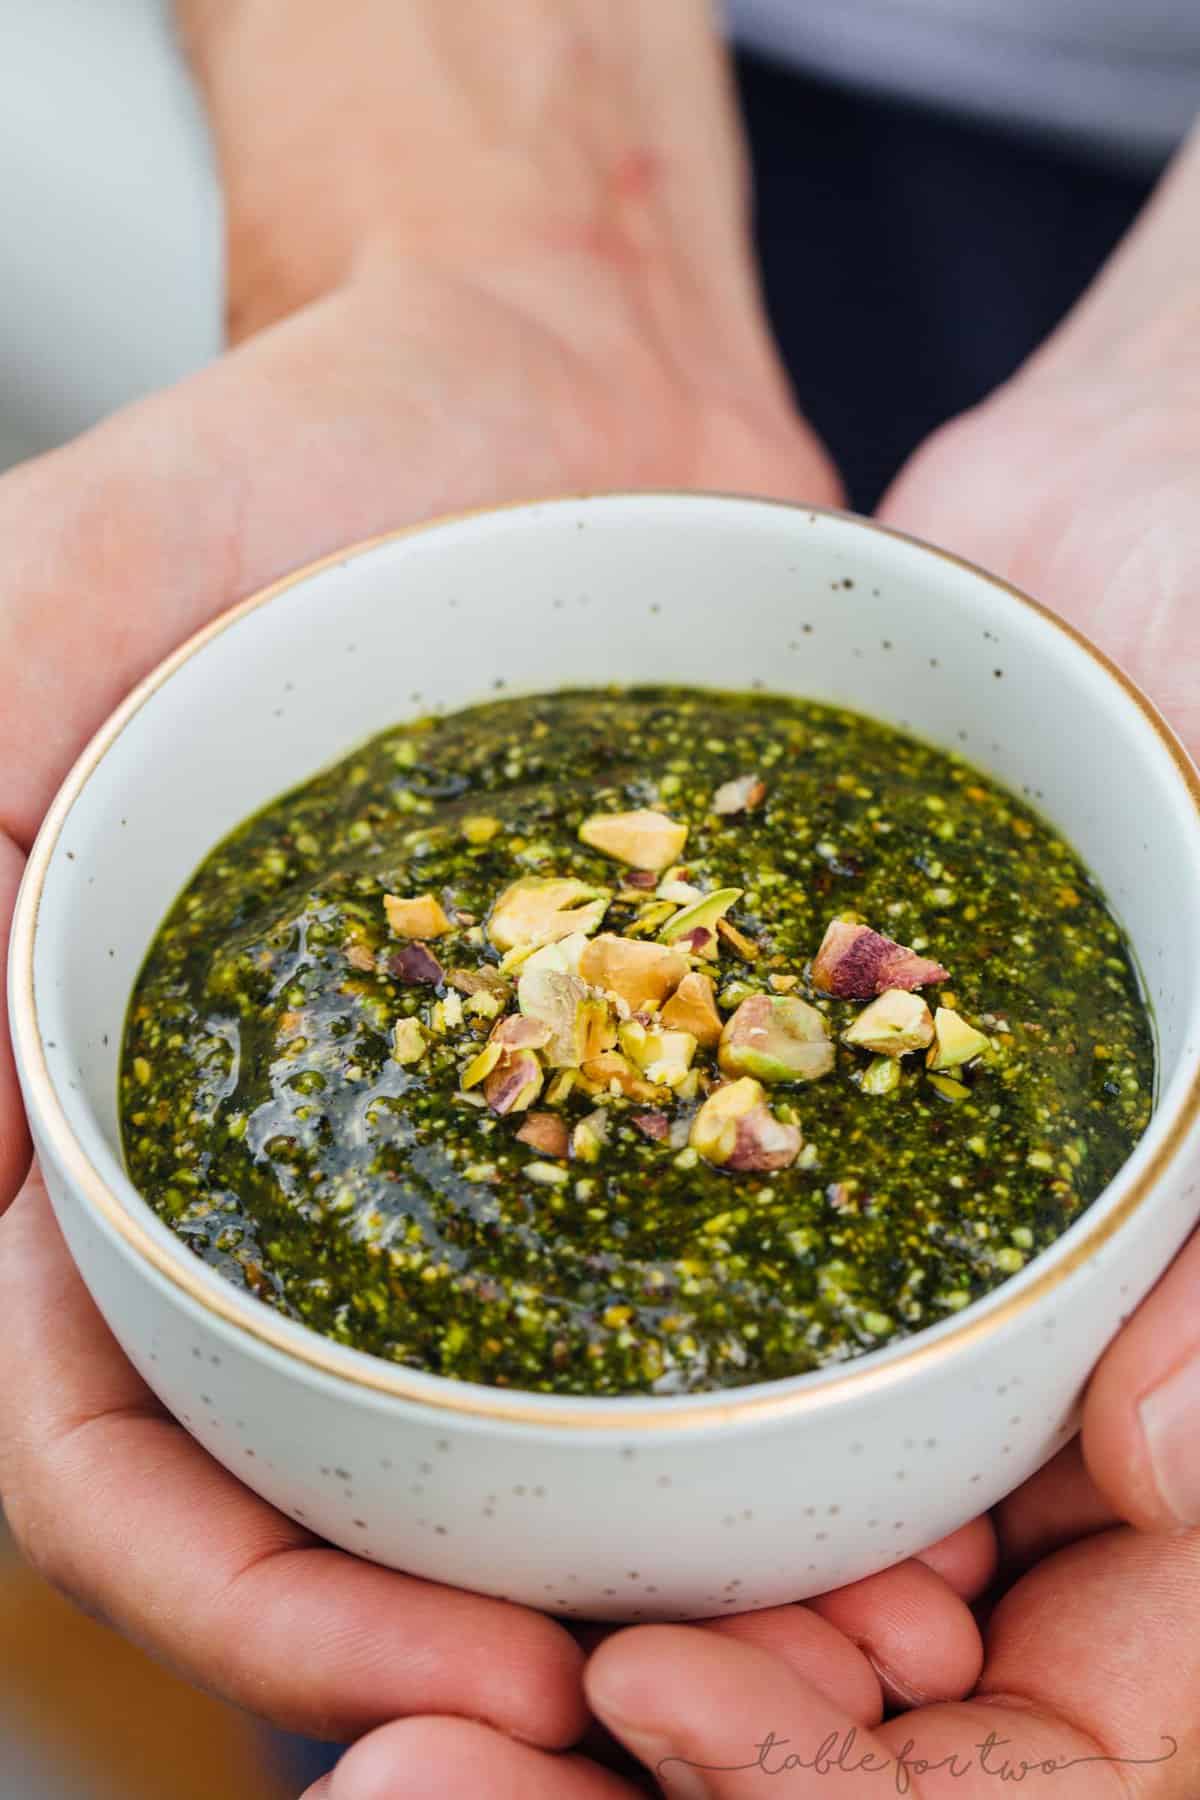 This pistachio mint pesto has so much robust flavor and is a great topping for all grilled meats, pasta, and any sort of dipping or cheese and meat platter!